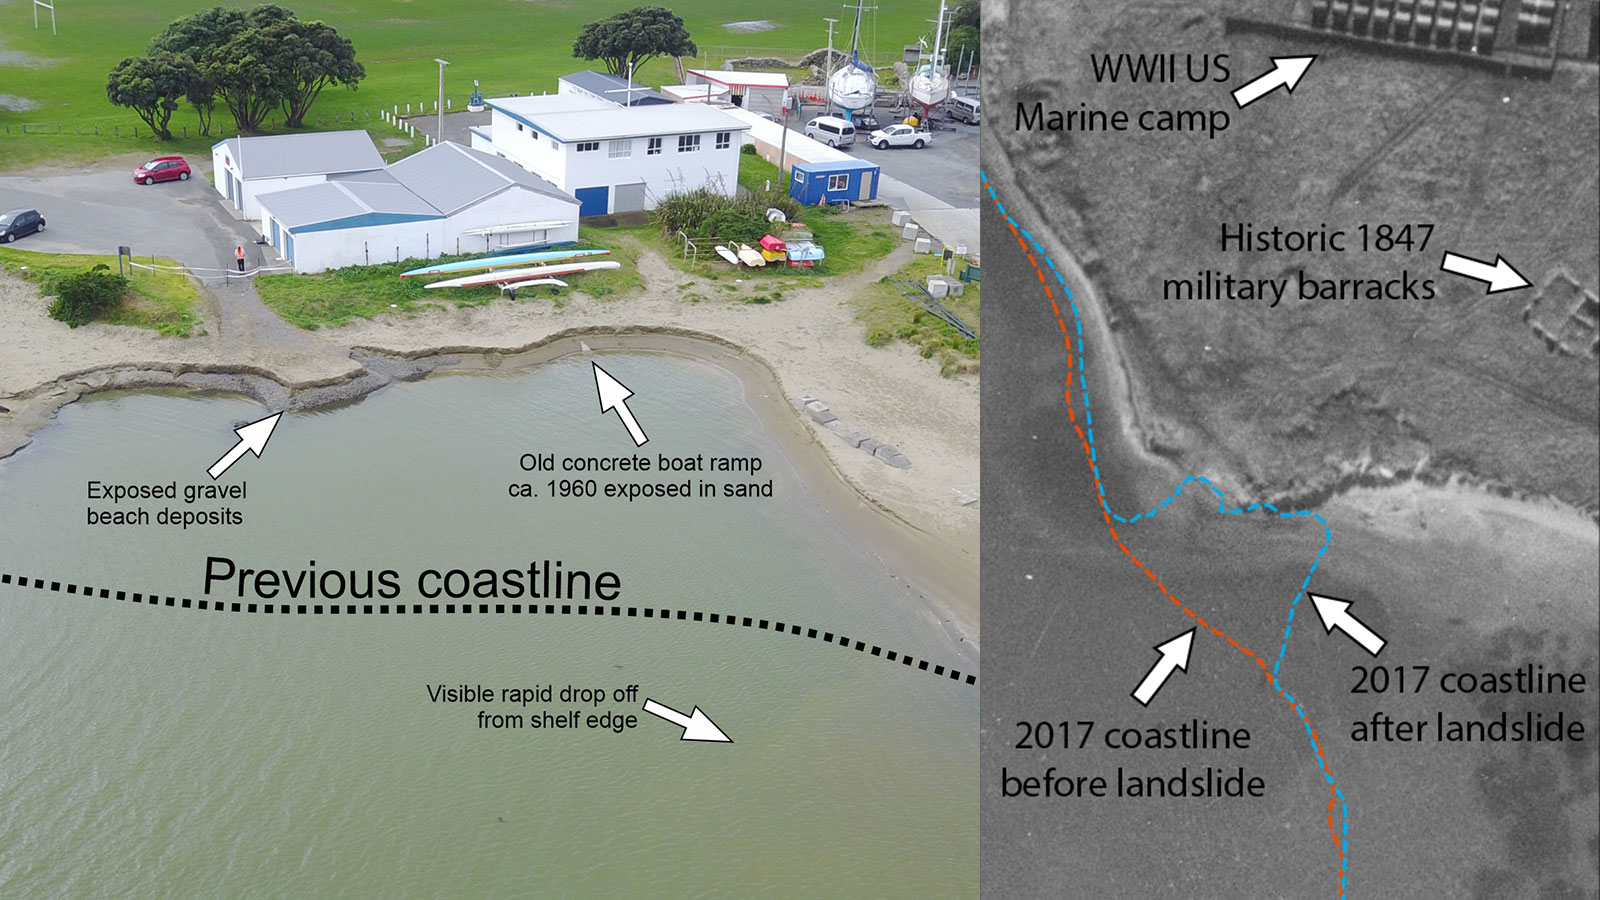 Diagrams comparing images from 2017 to after the landslide